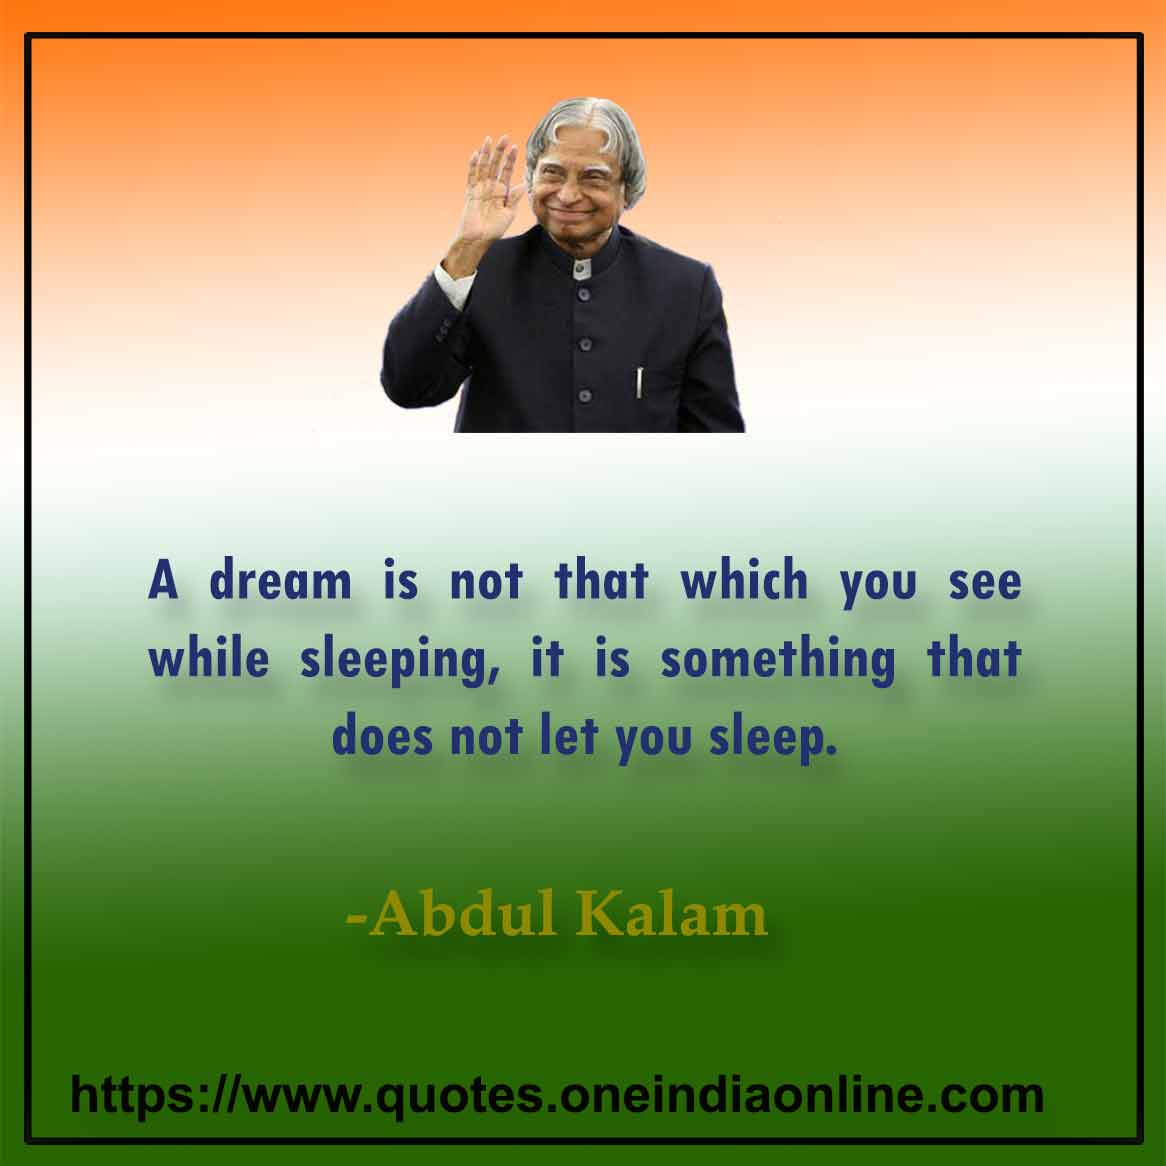 A dream is not that which you see while sleeping, it is something that does not let you sleep.

